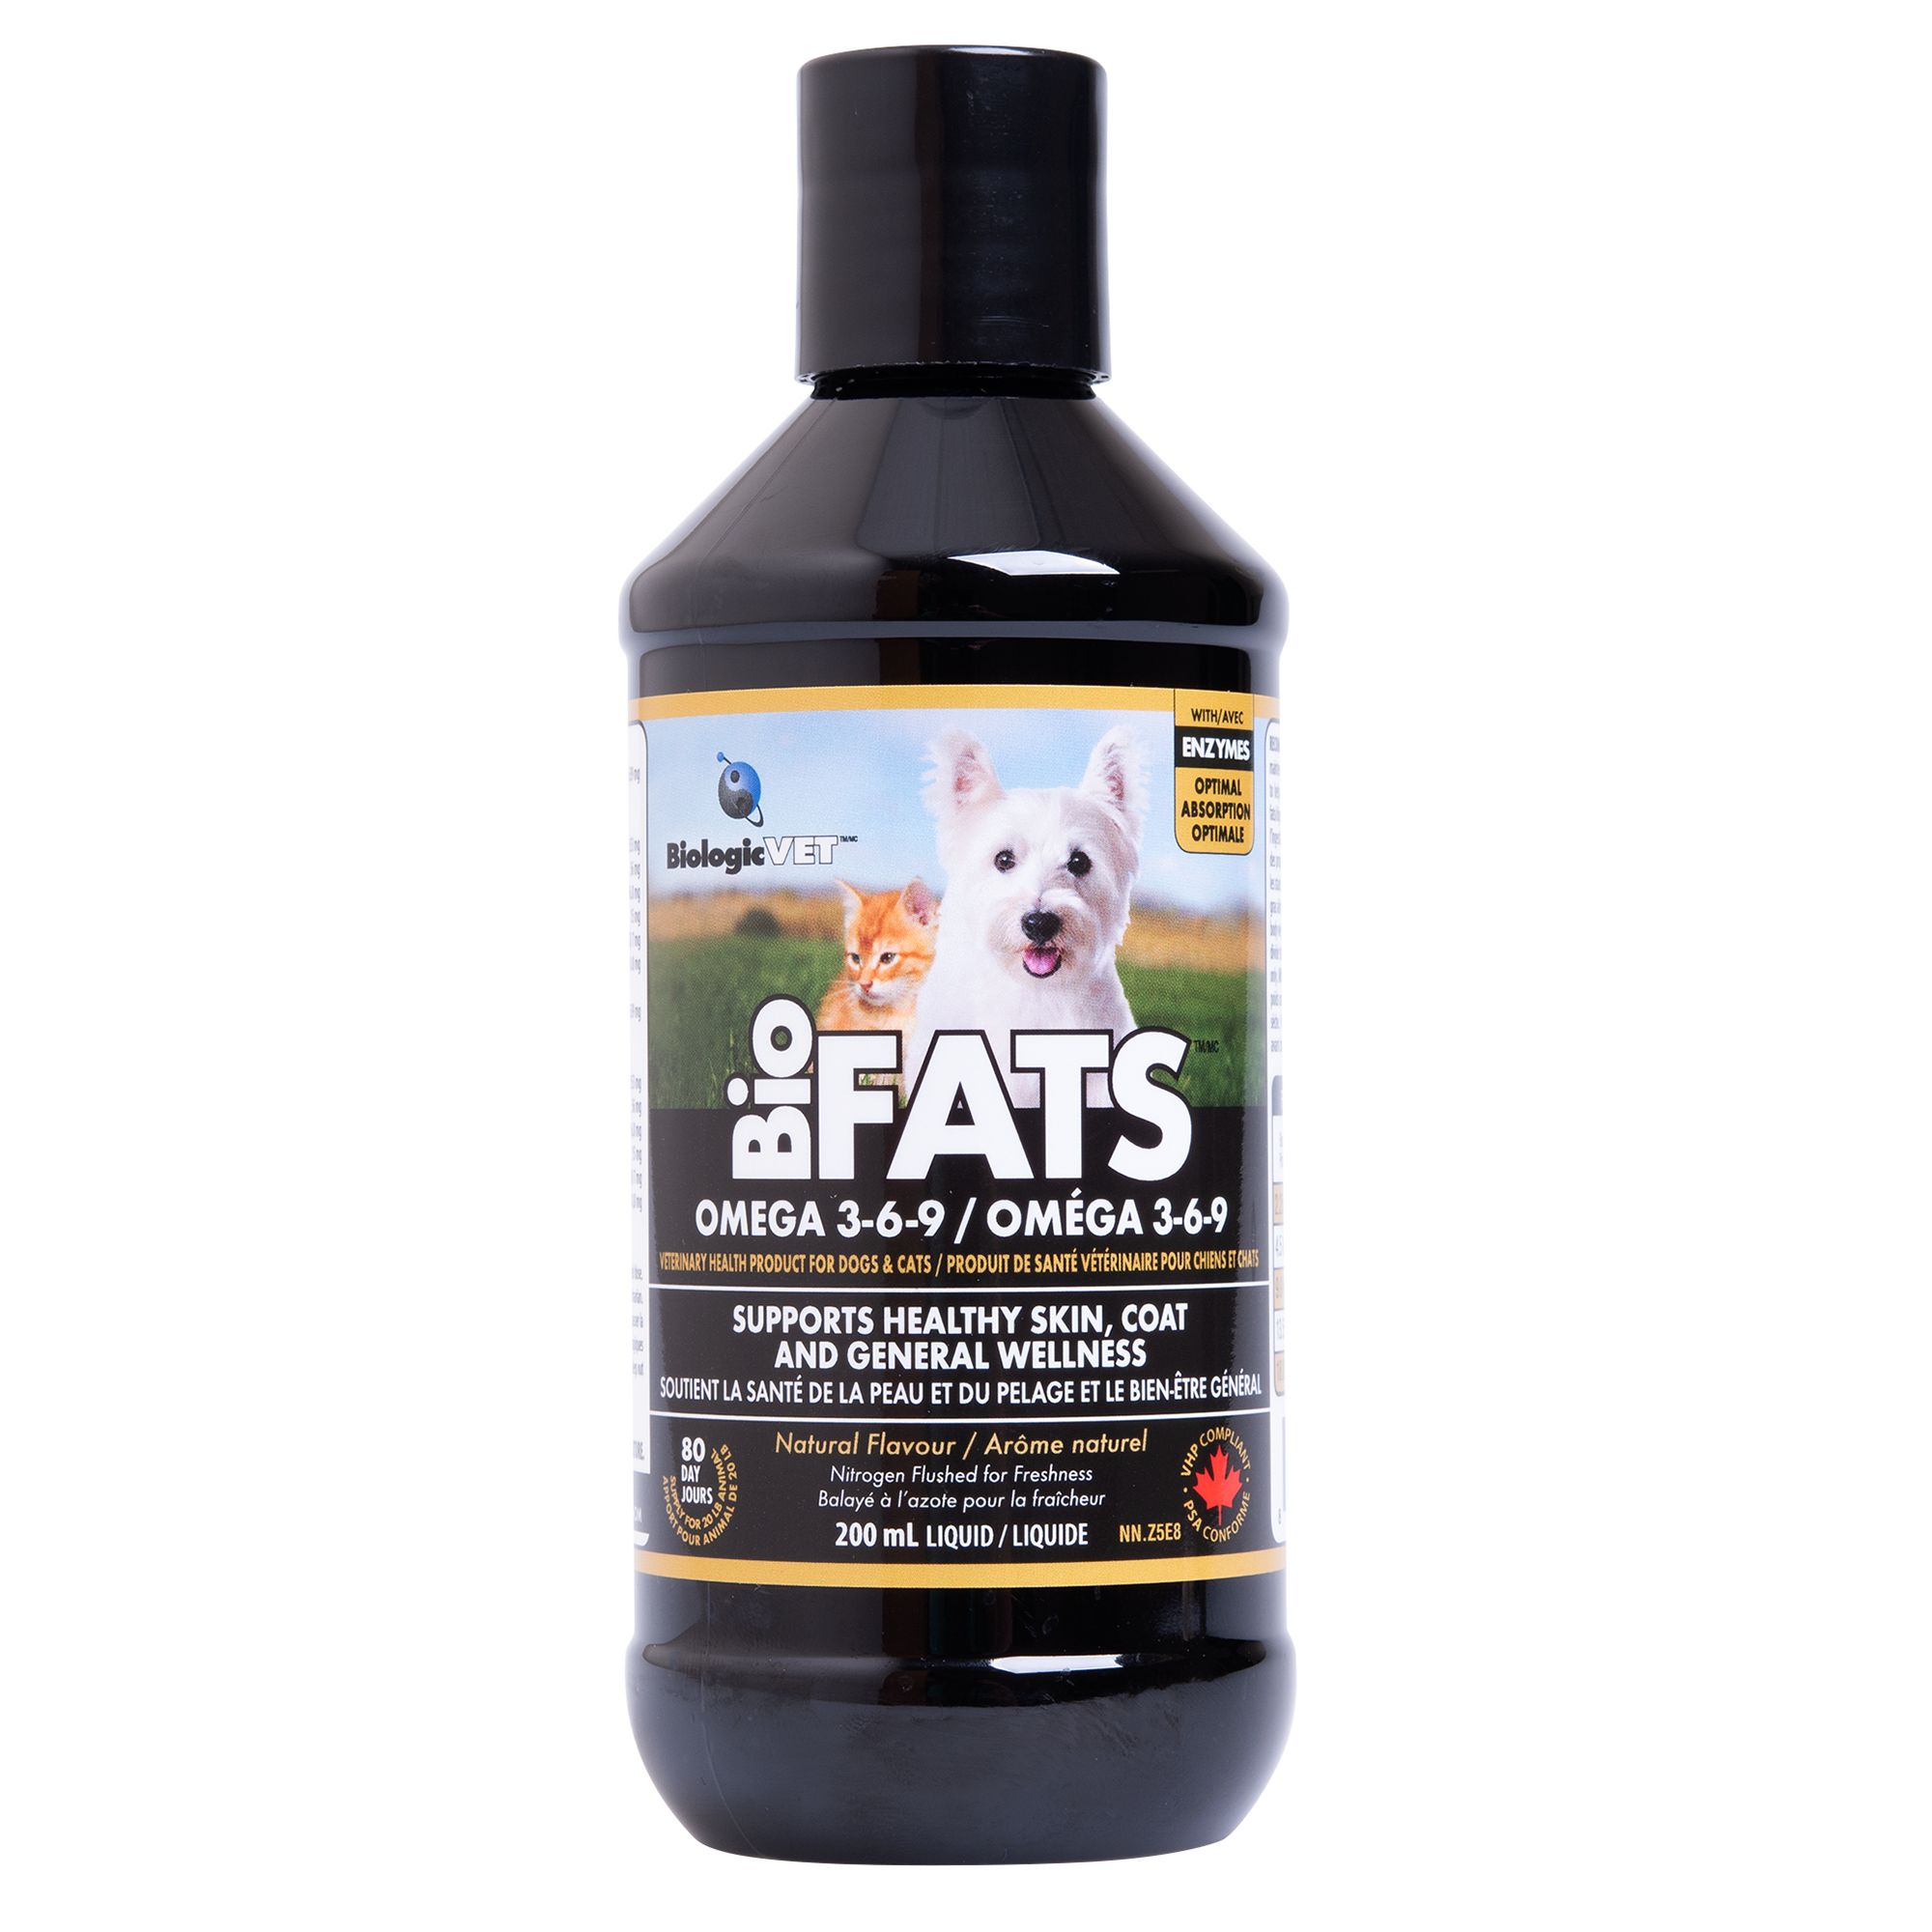 omega 3 and omega 6 supplements for dogs